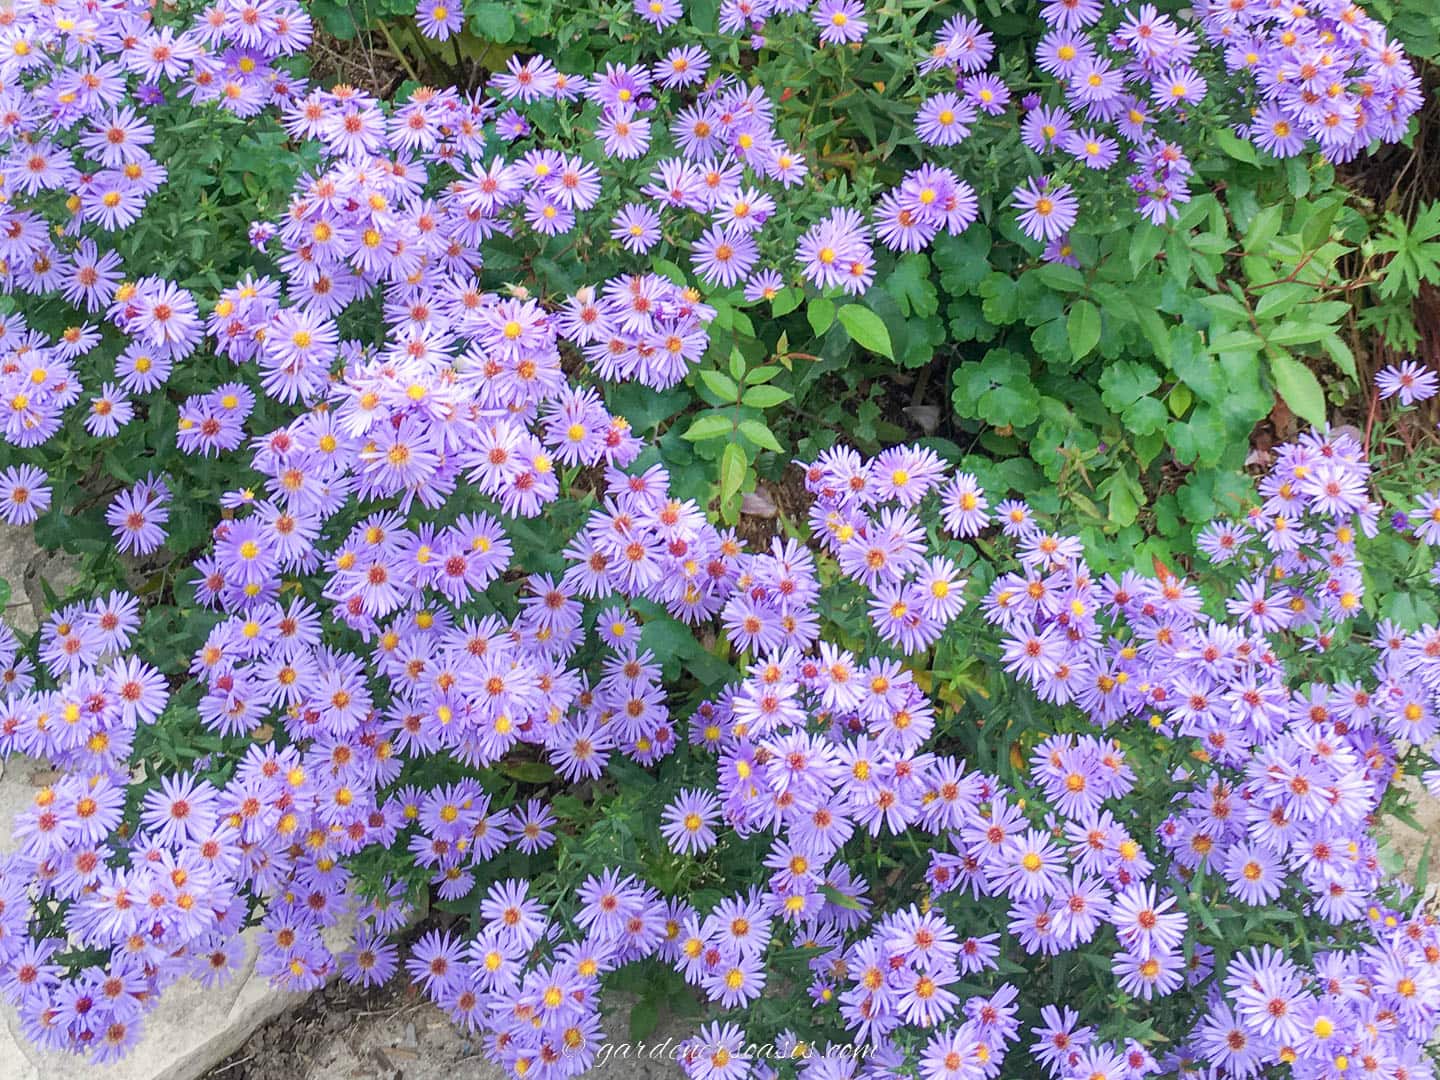 Fall container plants - purple asters